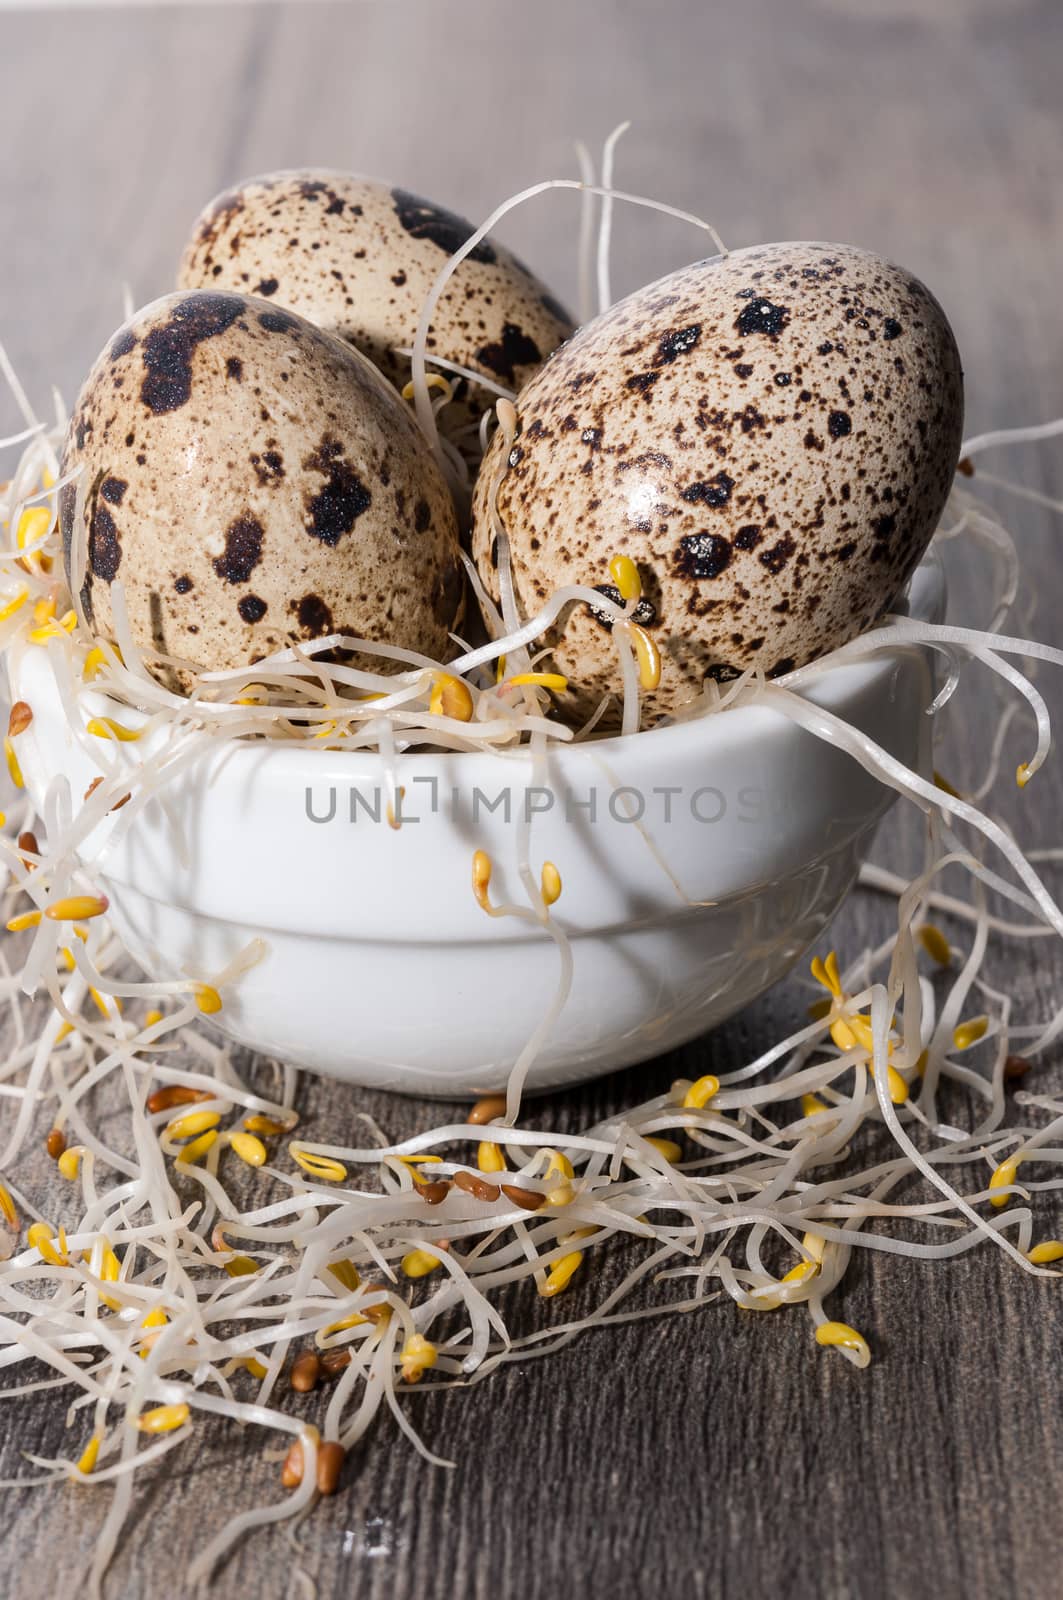 Quail eggs on a bowl of alfalfa sprouts